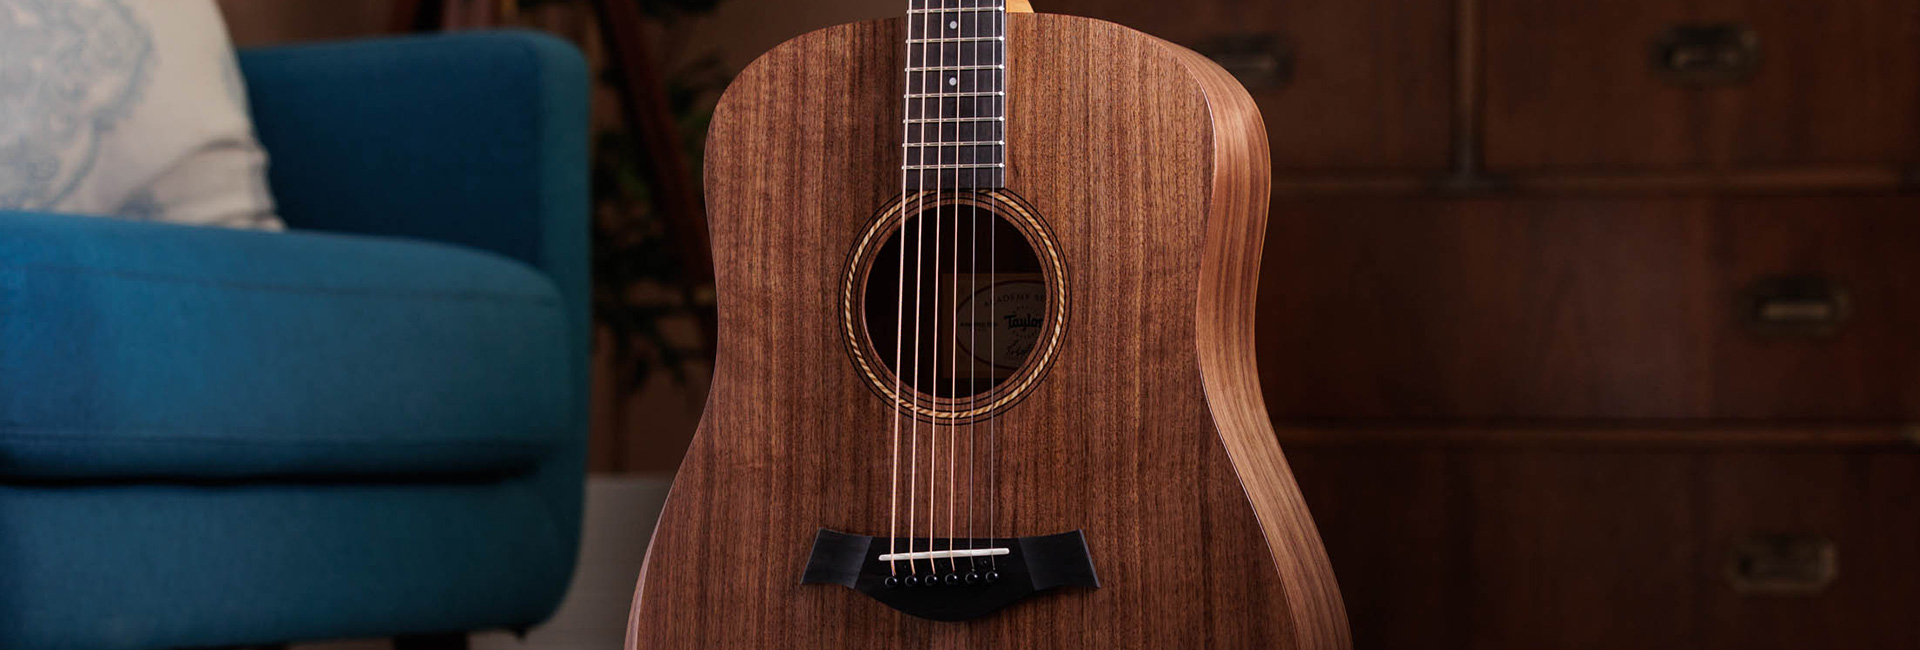 taylor-features-top-woods-walnut